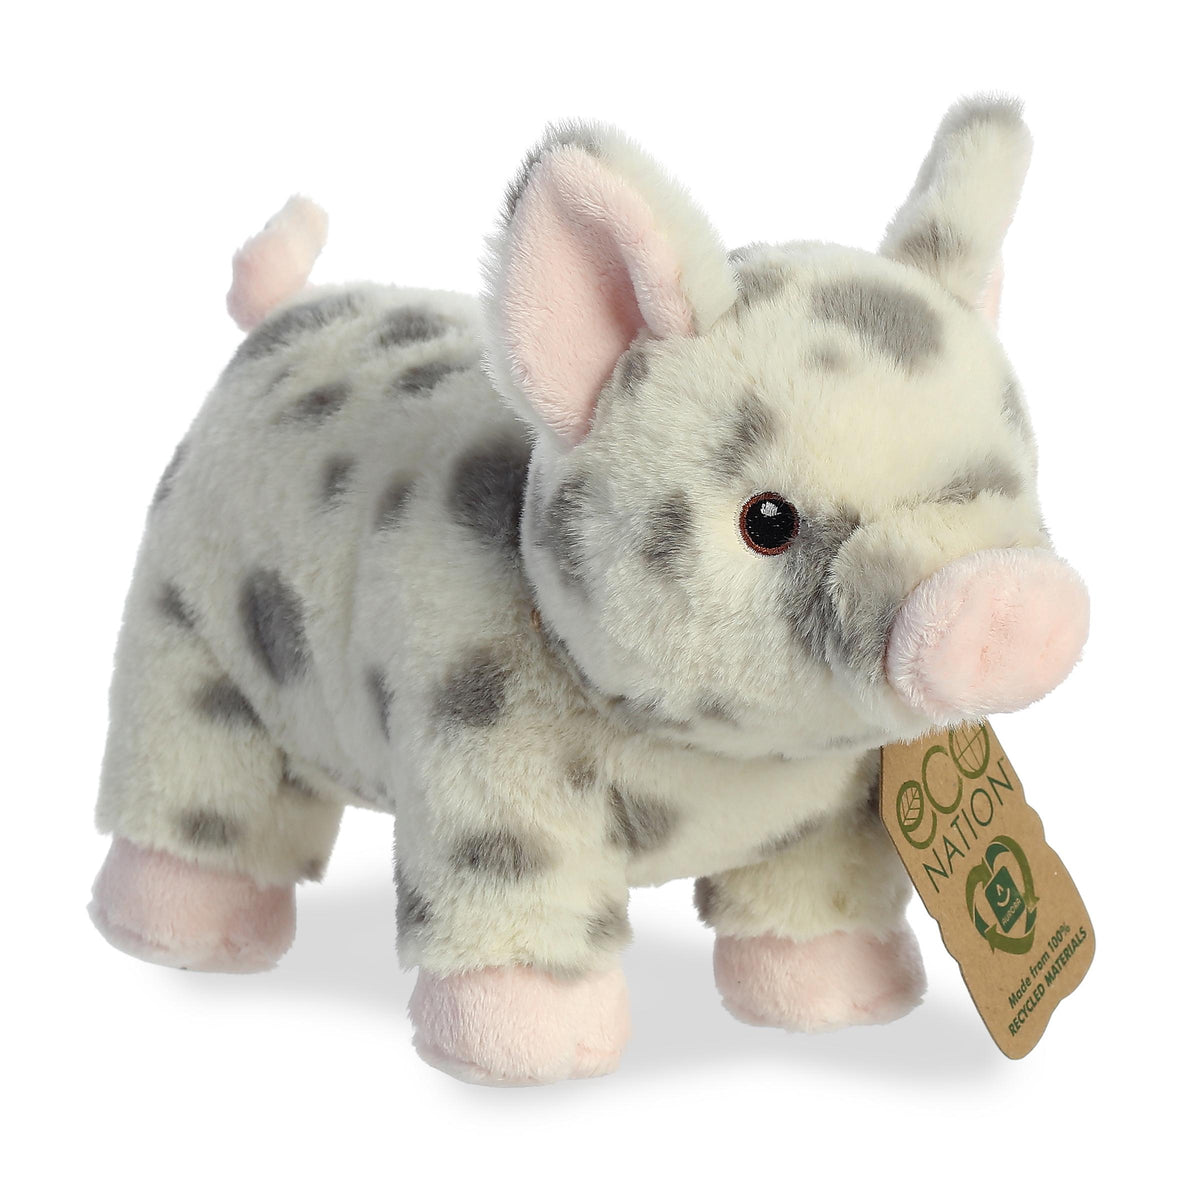 A delightful spotted pig plush with a white body and grey spots, sweet embroidered eyes, and an eco-nation tag